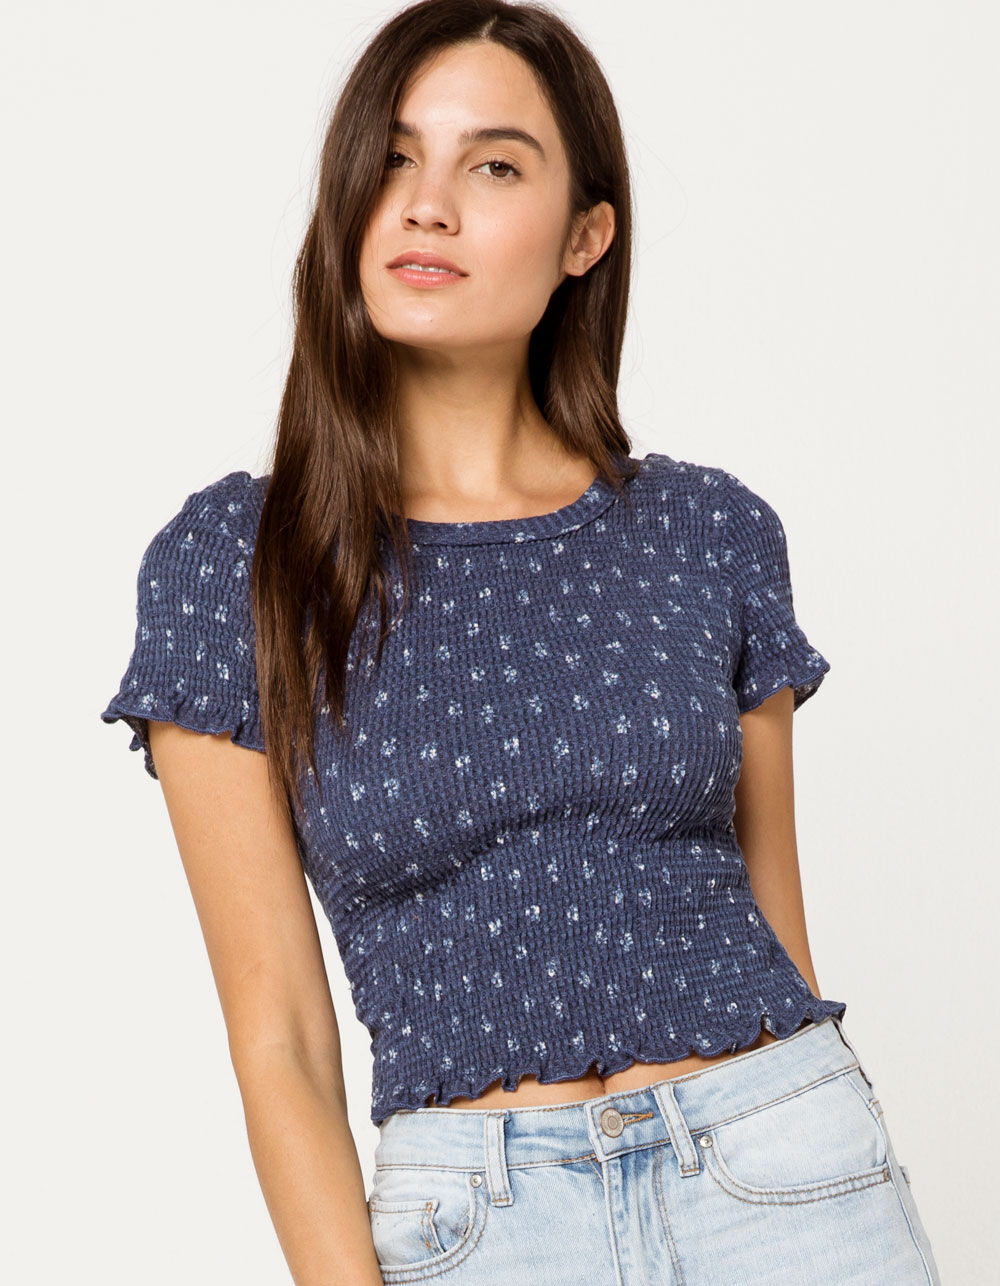 SKY AND SPARROW Smocked Ditsy Blue Womens Tee - BLUE | Tillys